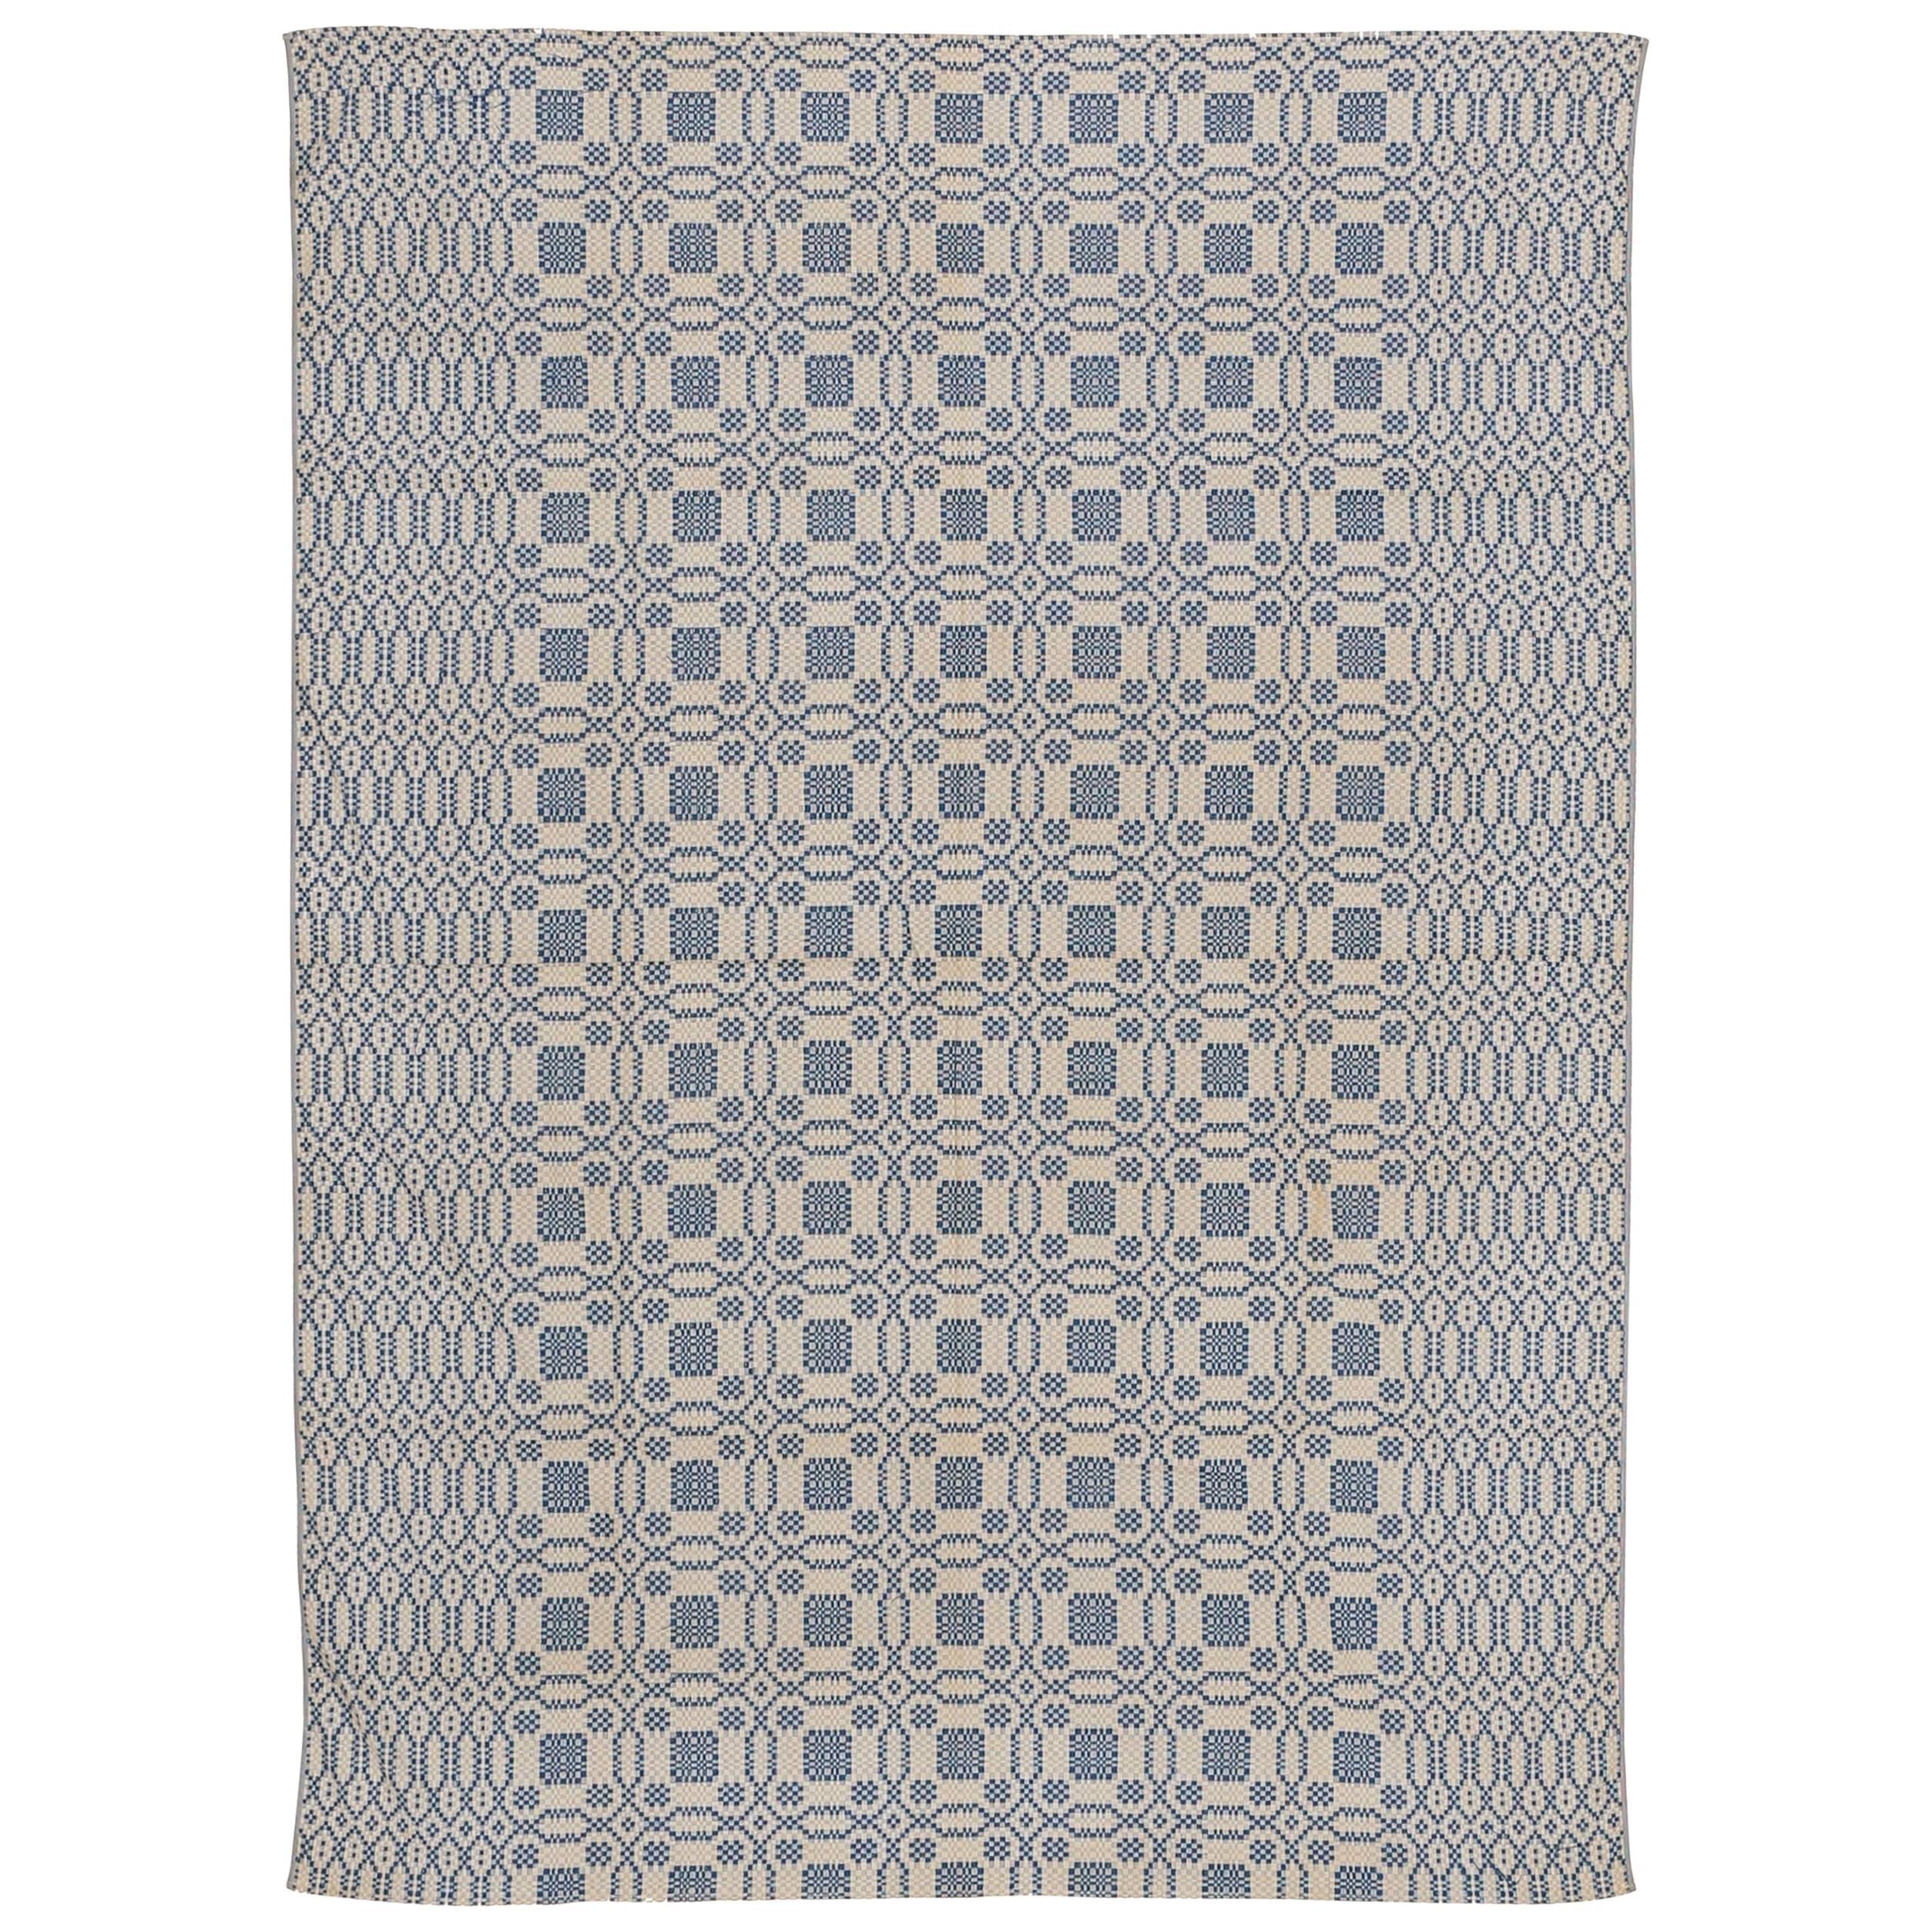 Fine Antique Ivory and Blue American Coverlet Rug